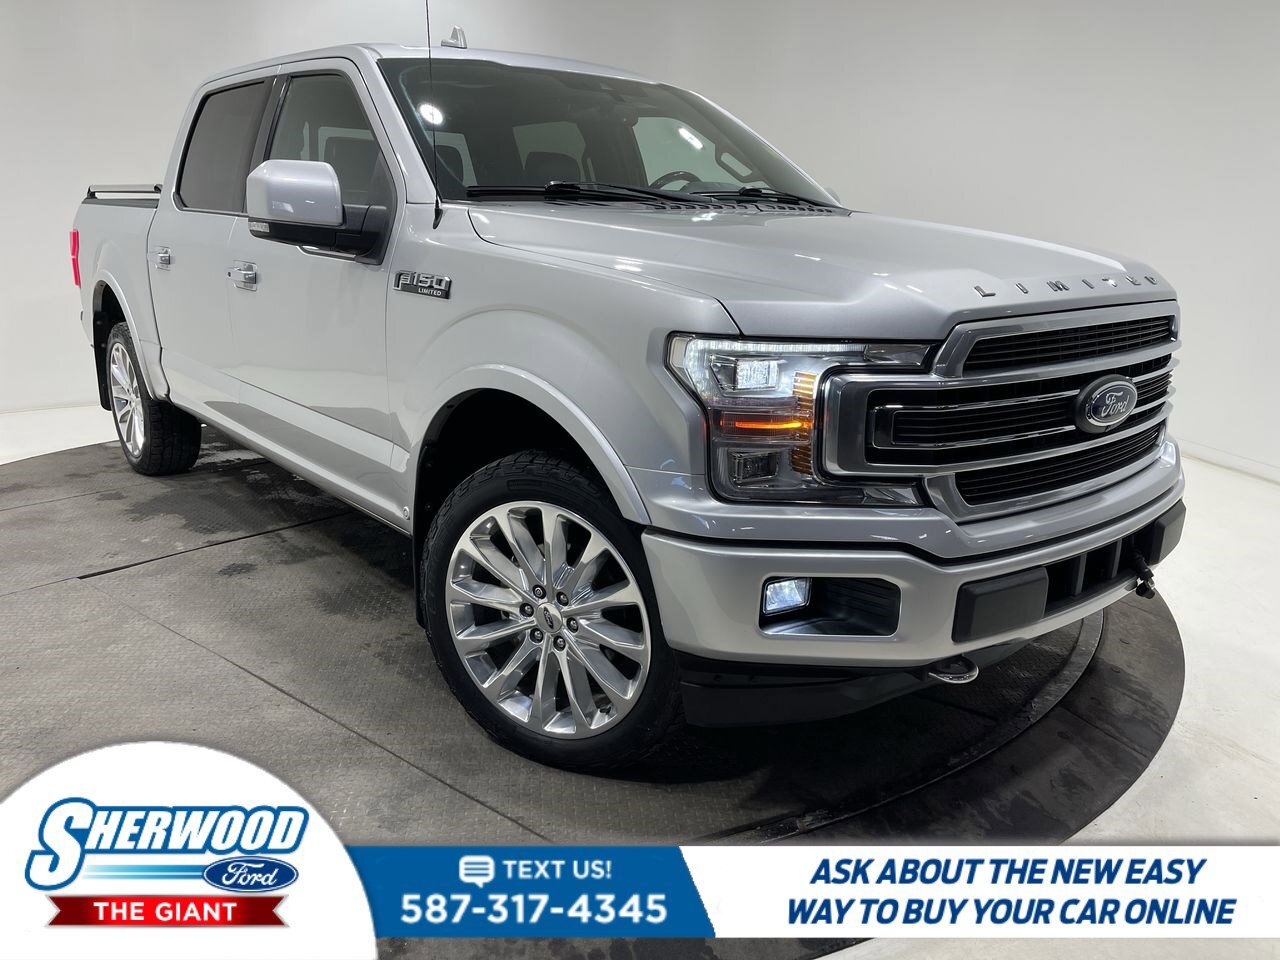 2018 Ford F-150 Limited- $0 Down $234 Weekly- MOONROOF- LEATHER